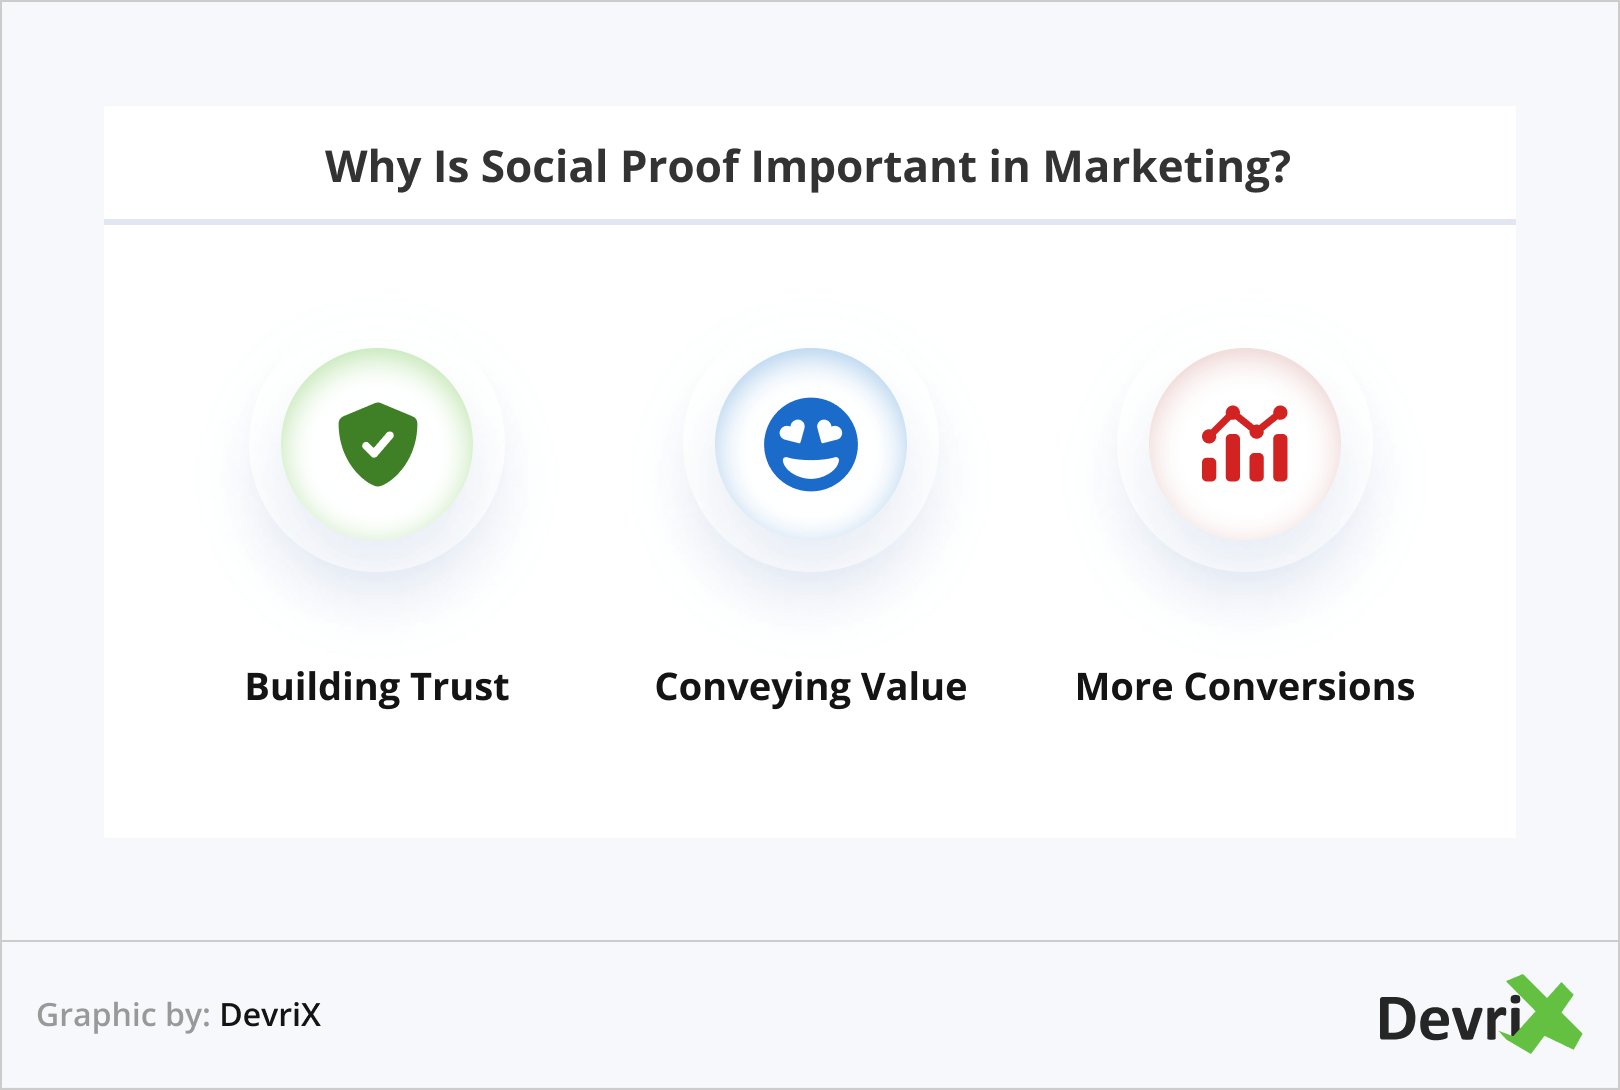 Why Is Social Proof Important in Marketing